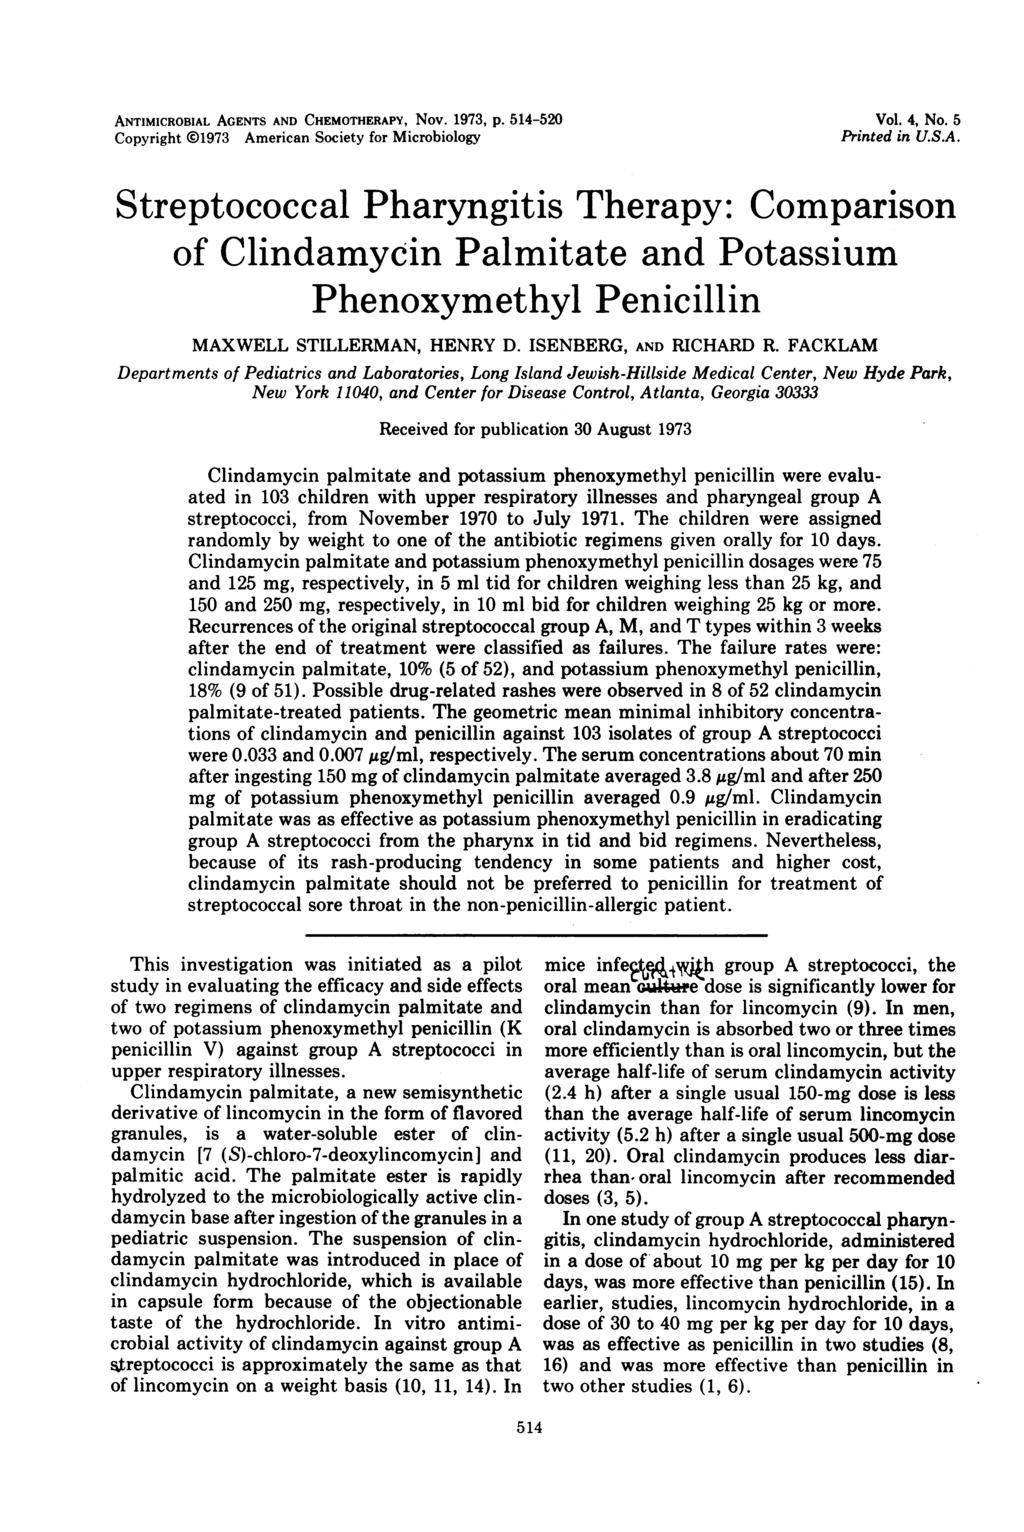 ANTIMICROBIAL AGENTS AND CHEMOTHERAPY, Nov. 1973, p. 514-520 Copyright 01973 American Society for Microbiology Vol. 4, No. 5 Printed in U.S.A. Streptococcal Pharyngitis Therapy: Comparison of Clindamycin Palmitate and Potassium Phenoxymethyl Penicillin MAXWELL STILLERMAN, HENRY D.